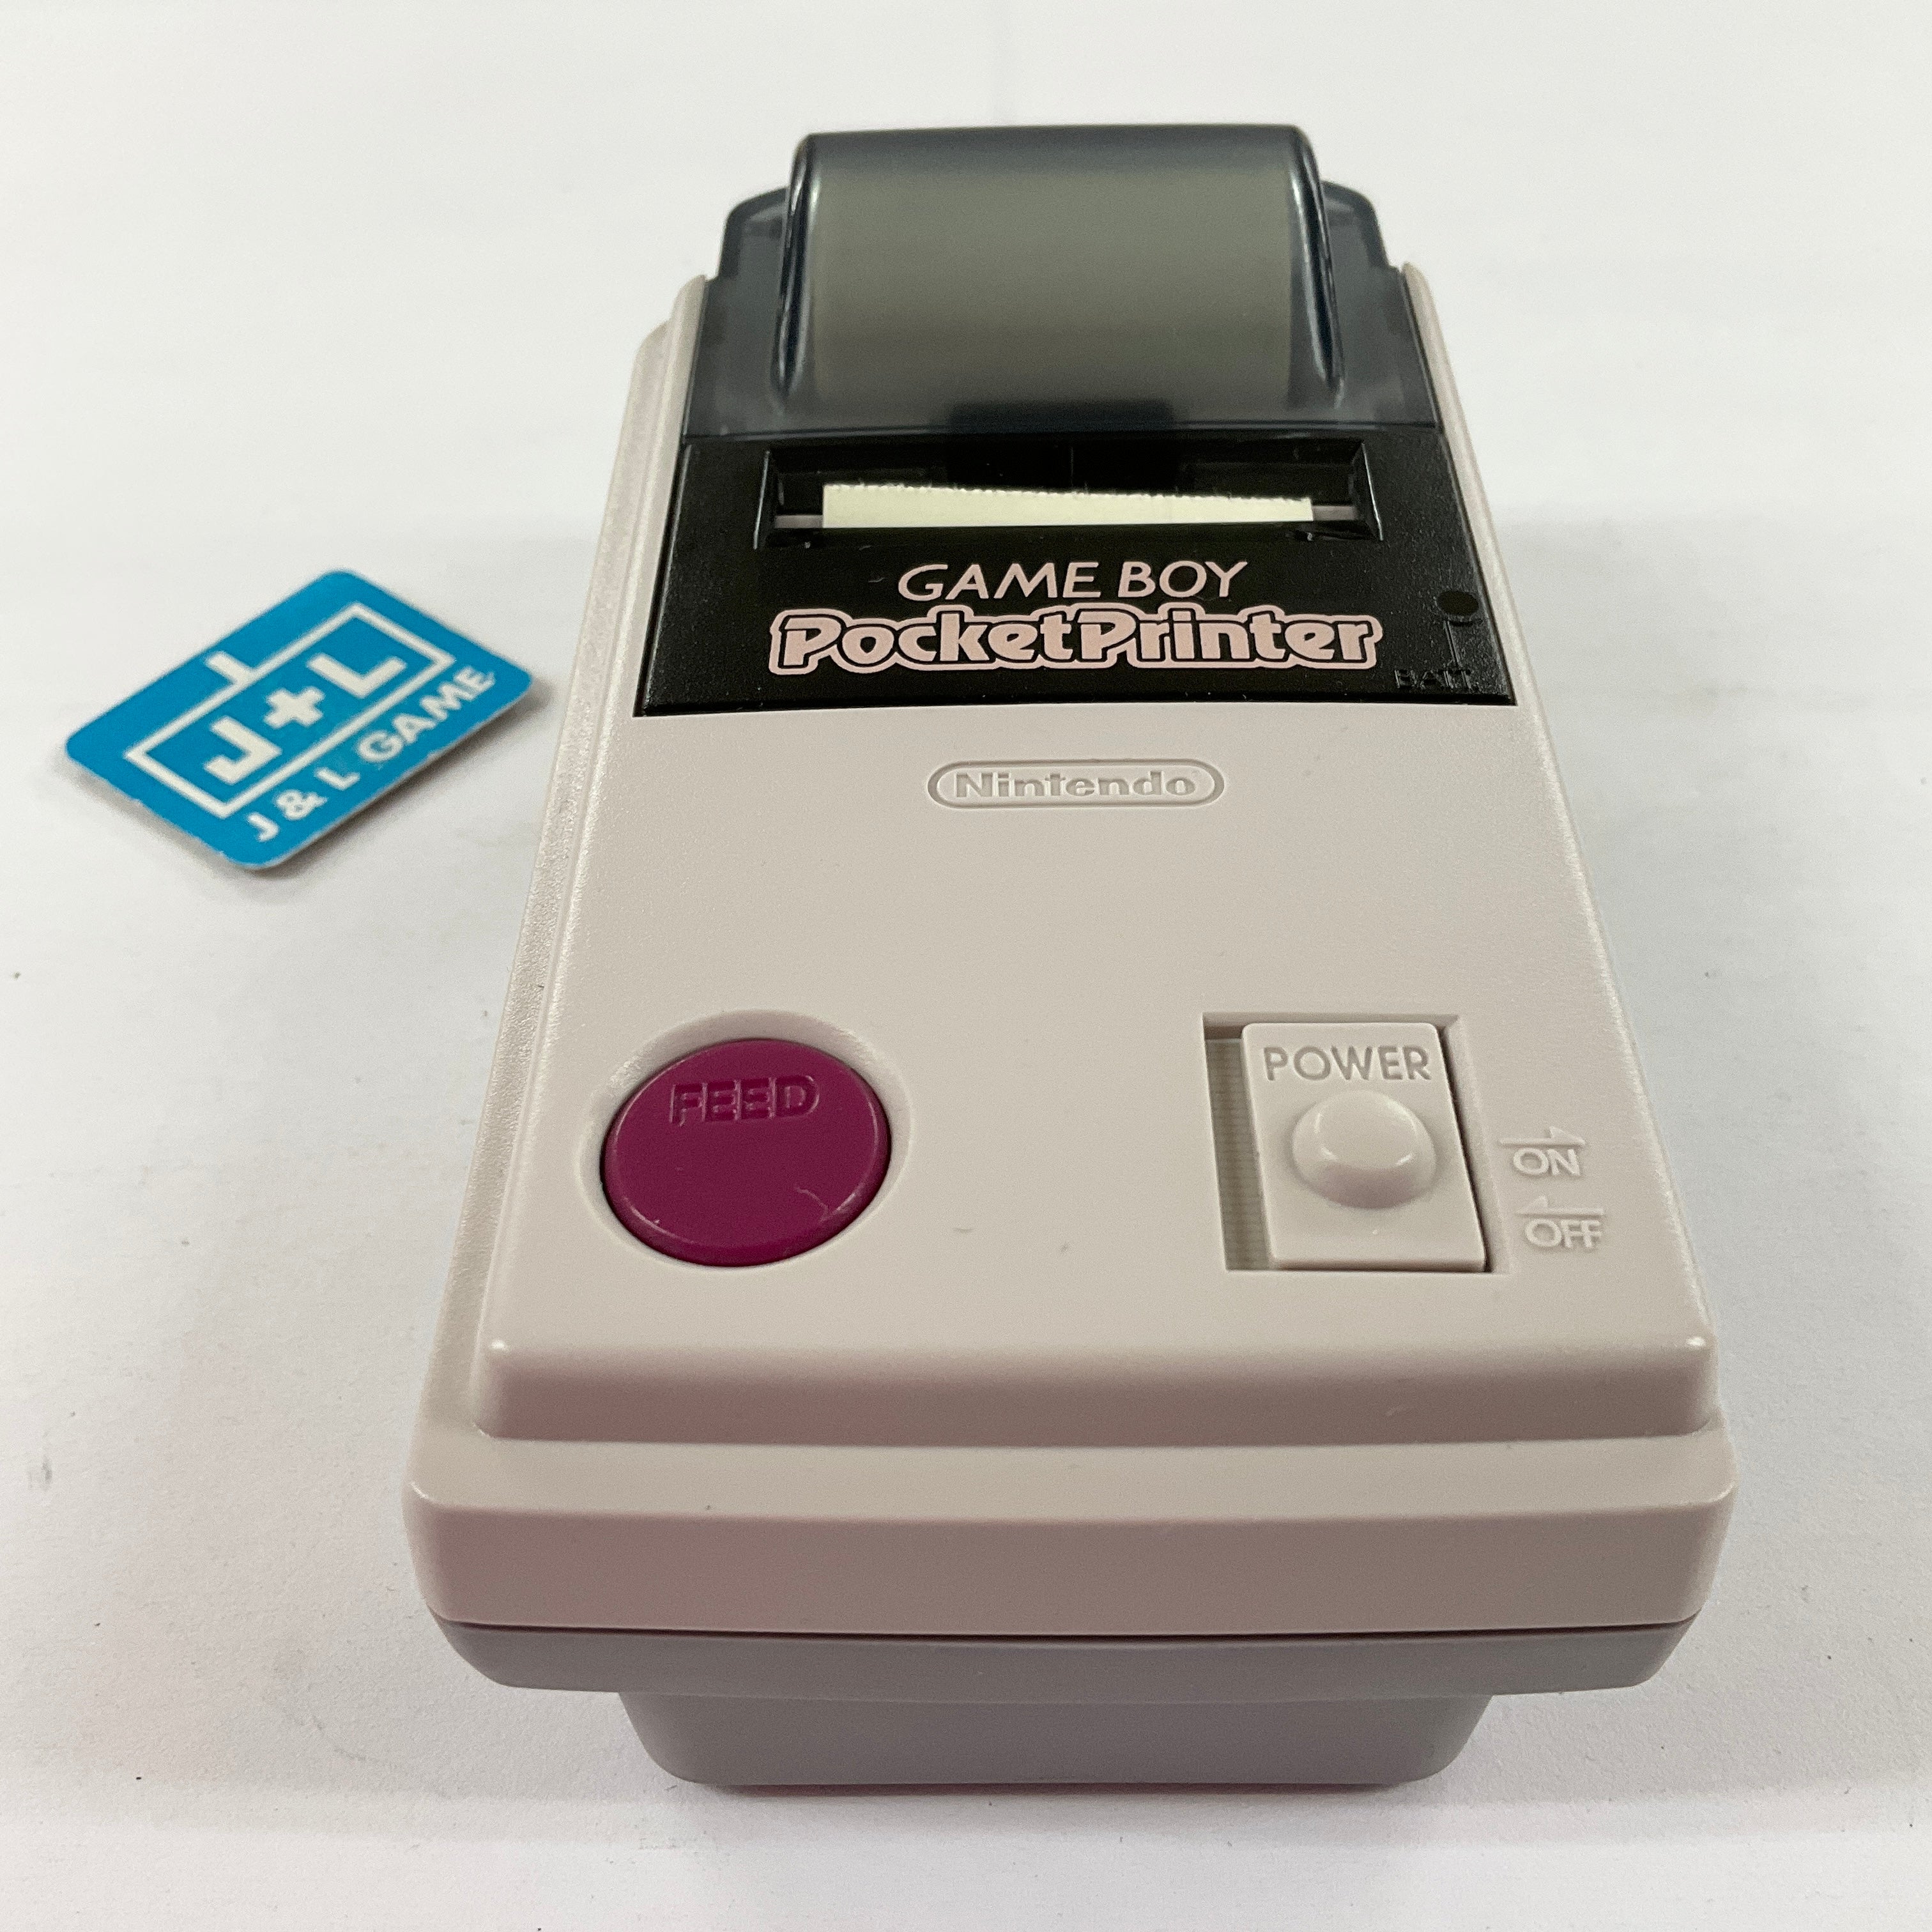 Gameboy Pocket Printer - (GB) Game Boy [Pre-Owned] (Japanese Import) Accessories Nintendo   